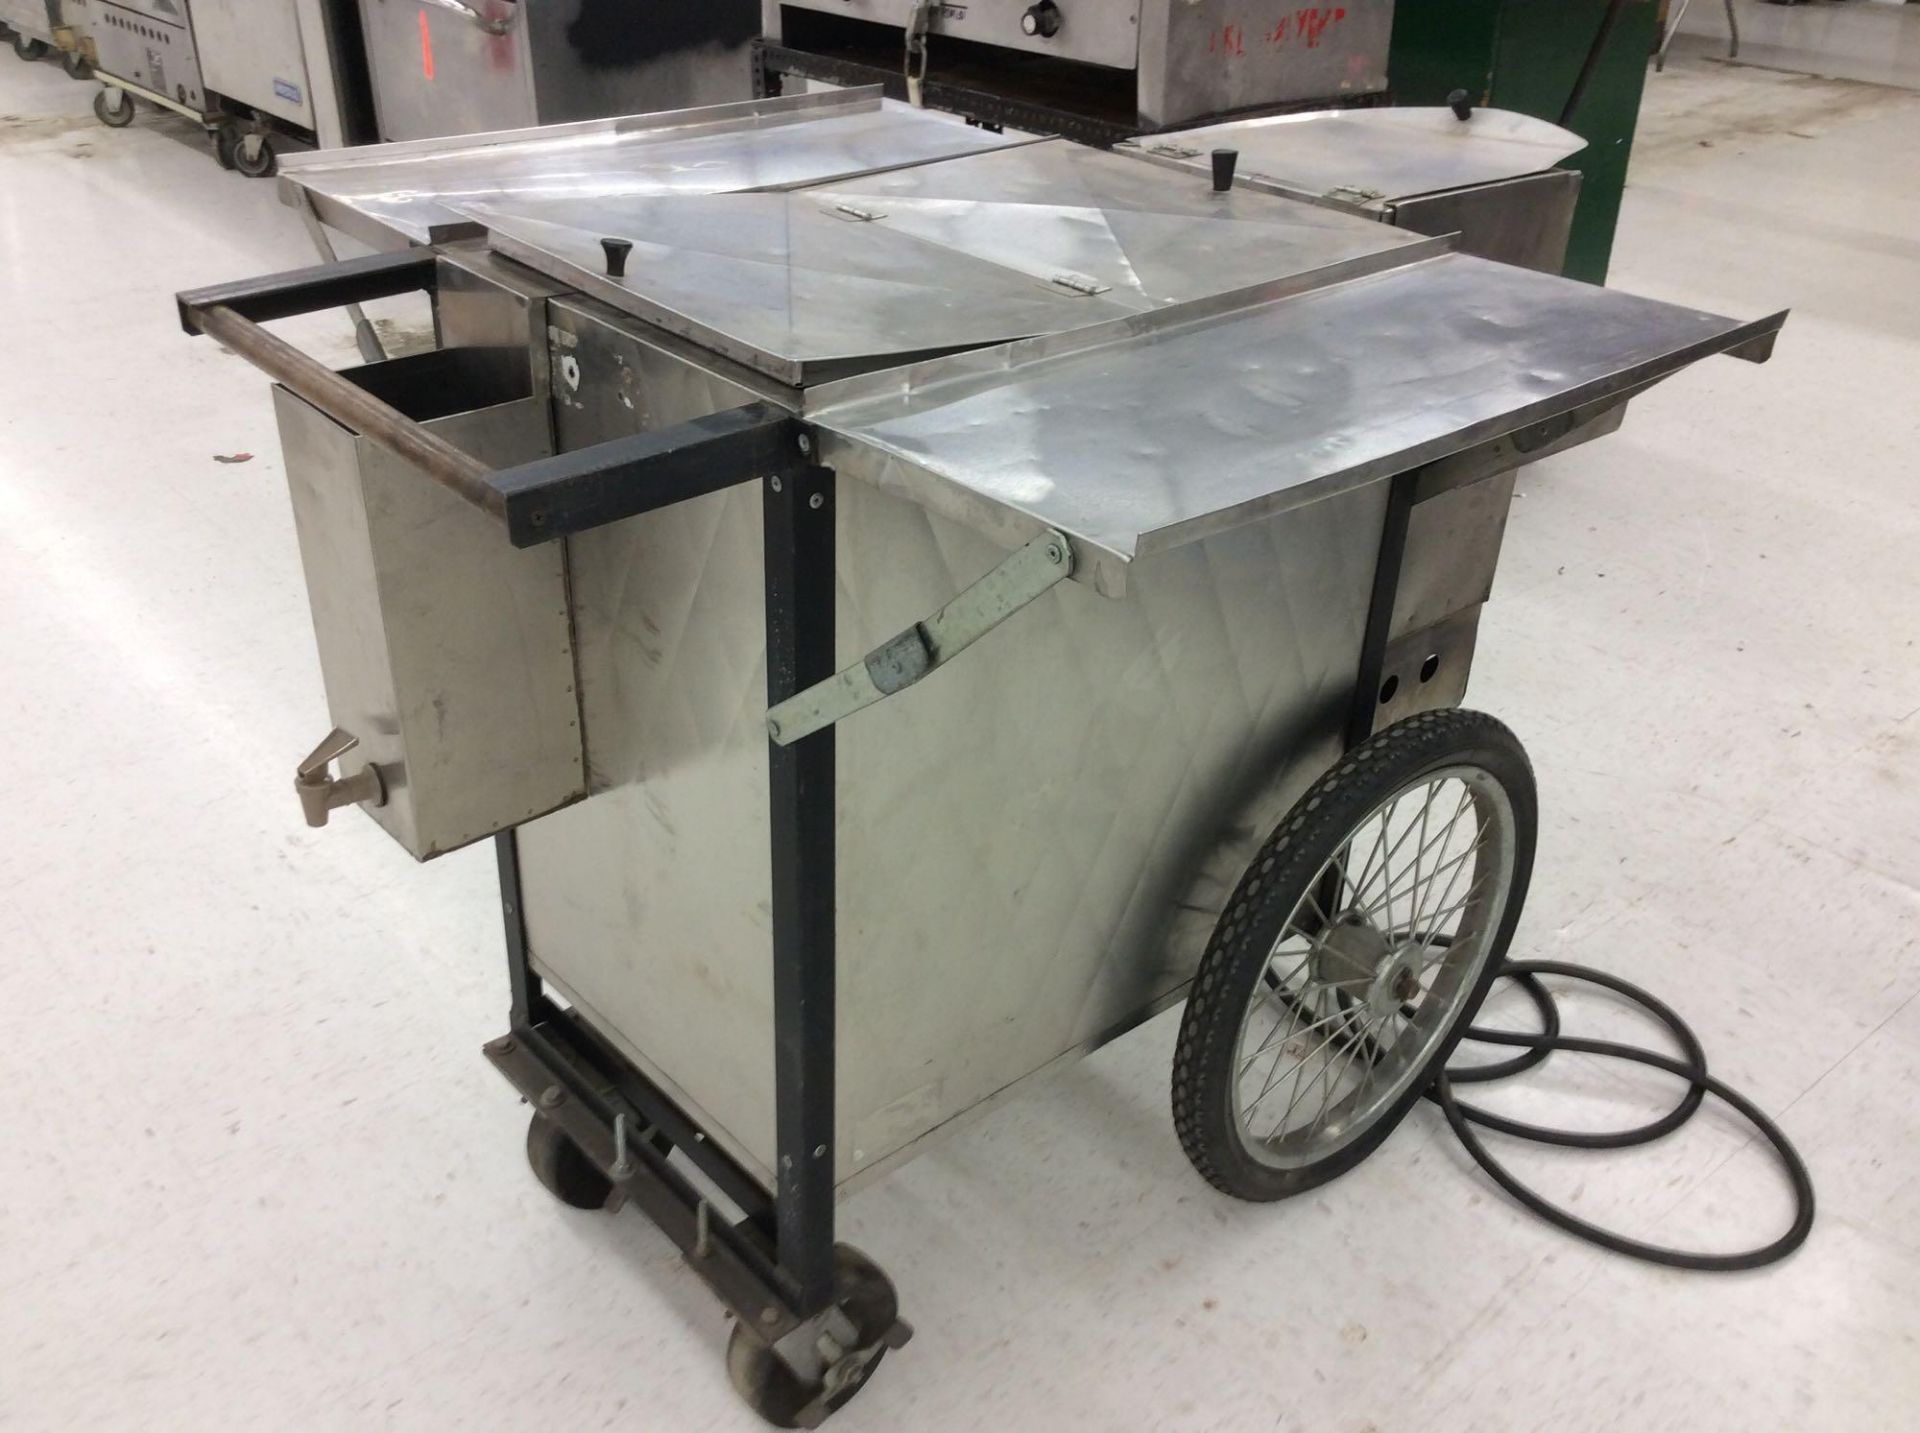 Propane powered Hotdog Cooker and Vending Cart, with insulated food storage compartment - Image 2 of 2